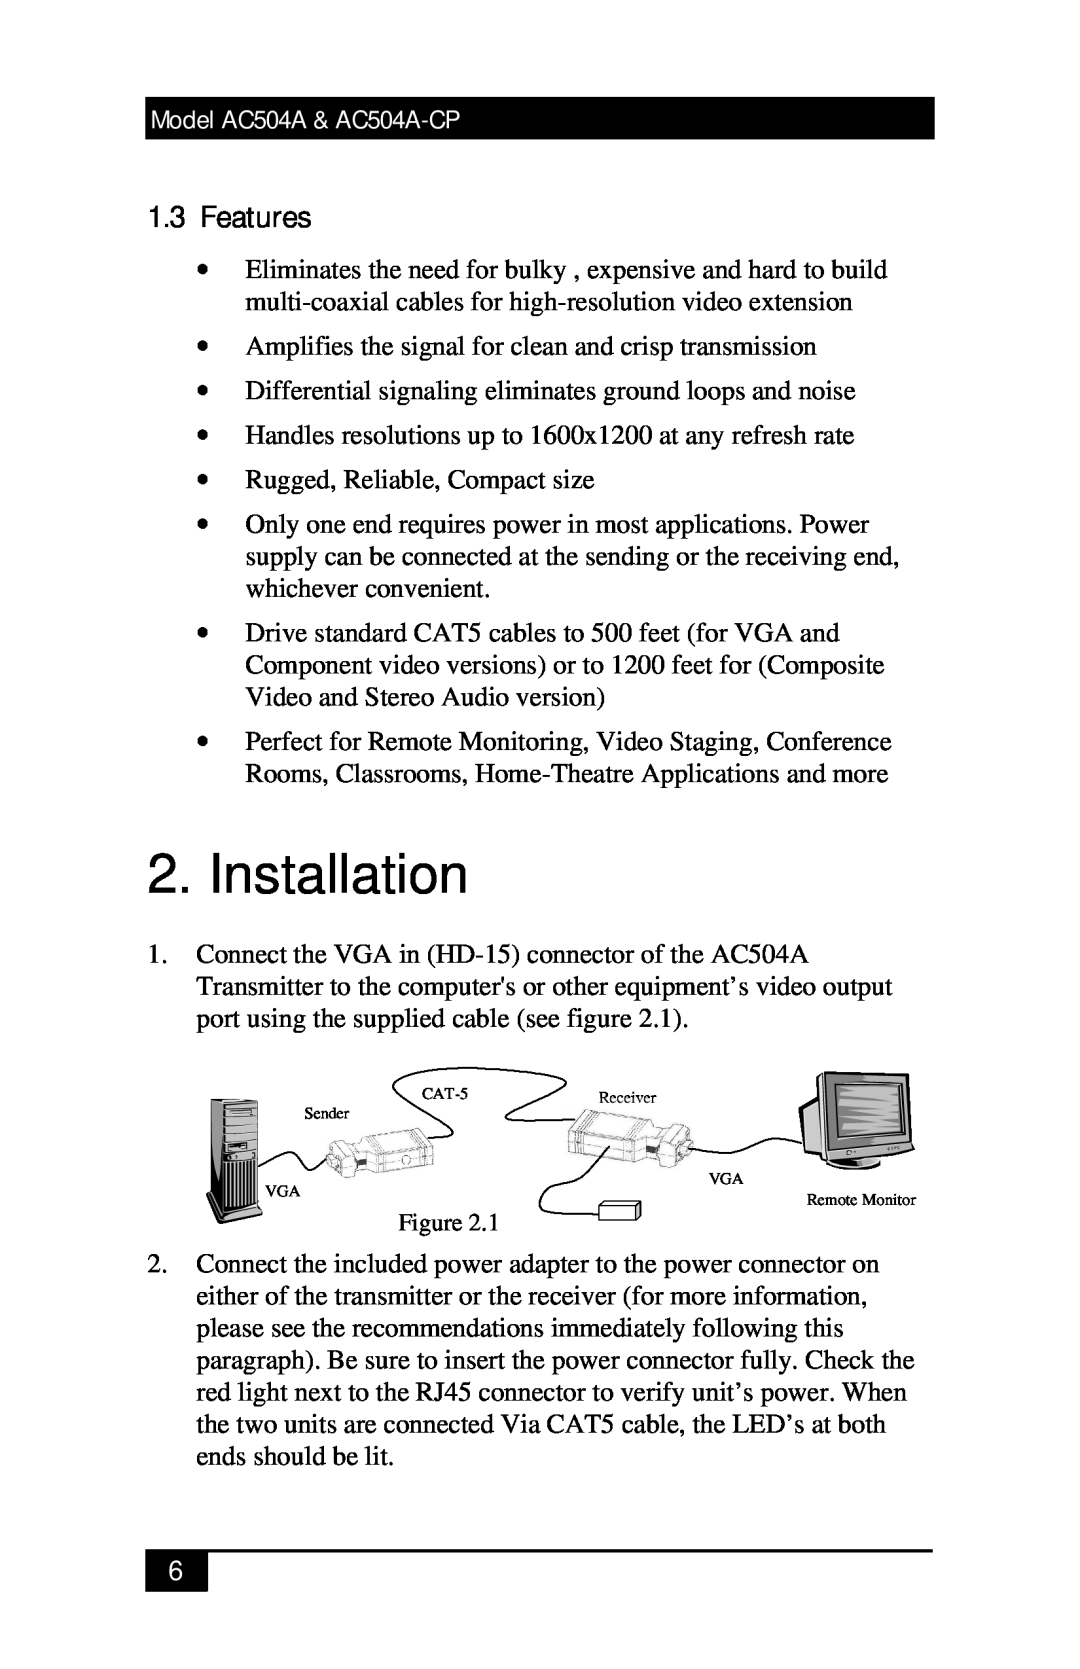 Black Box Mini-CAT5 Video-over-CAT5 Extension manual Installation, 1.3Features, Model AC504A & AC504A-CP 